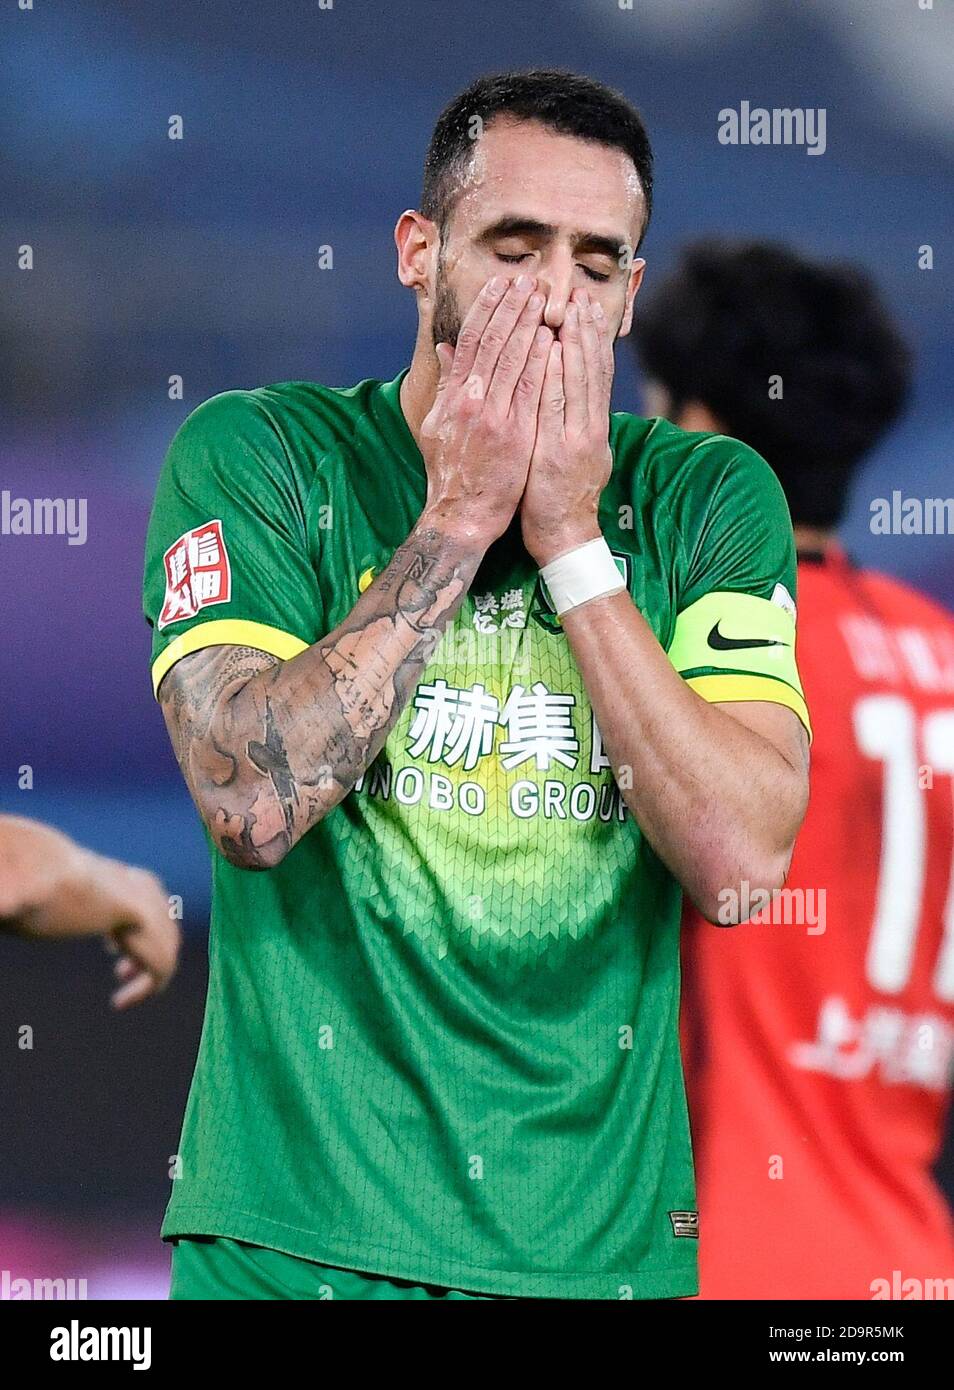 Suzhou, China's Jiangsu Province. 7th Nov, 2020. Renato Augusto of Beijing Guoan reacts during the 19th round match between Beijing Guoan and Shanghai SIPG at the 2020 season Chinese Football Association Super League (CSL) Suzhou Division in Suzhou, east China's Jiangsu Province, Nov. 7, 2020. Credit: Xu Chang/Xinhua/Alamy Live News Stock Photo